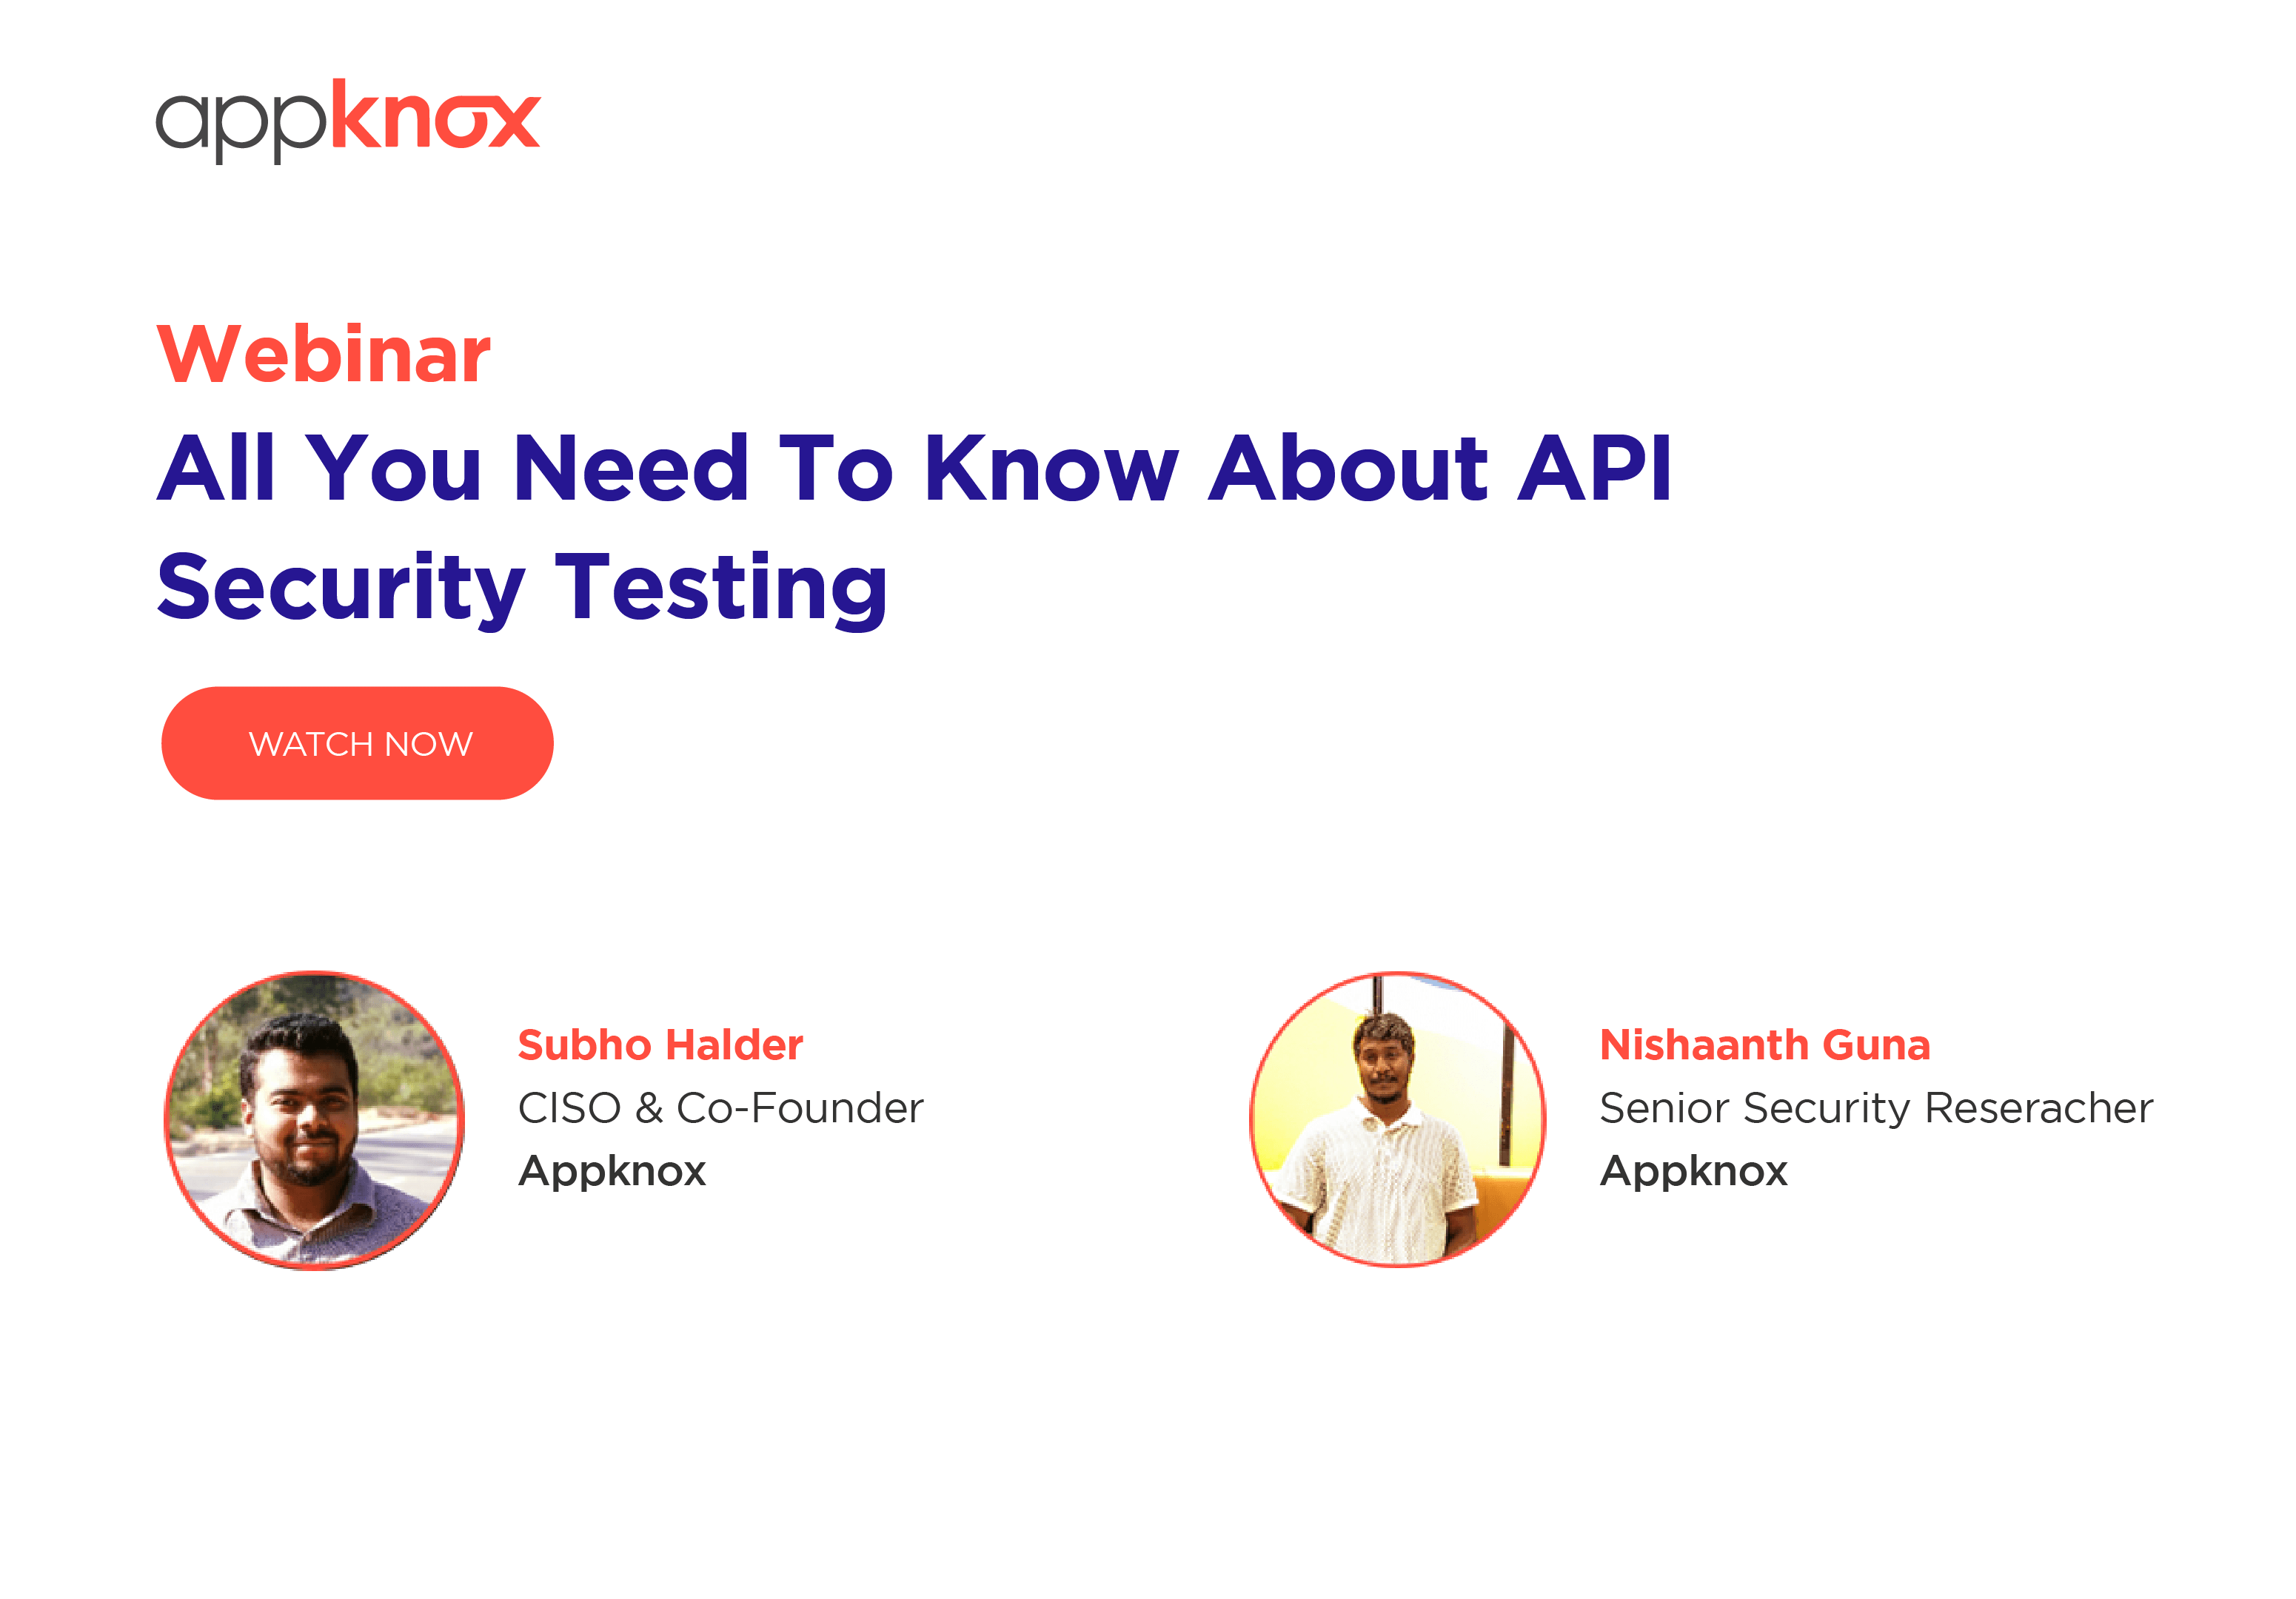 WEBINAR - All You Need To Know About API Security Testing